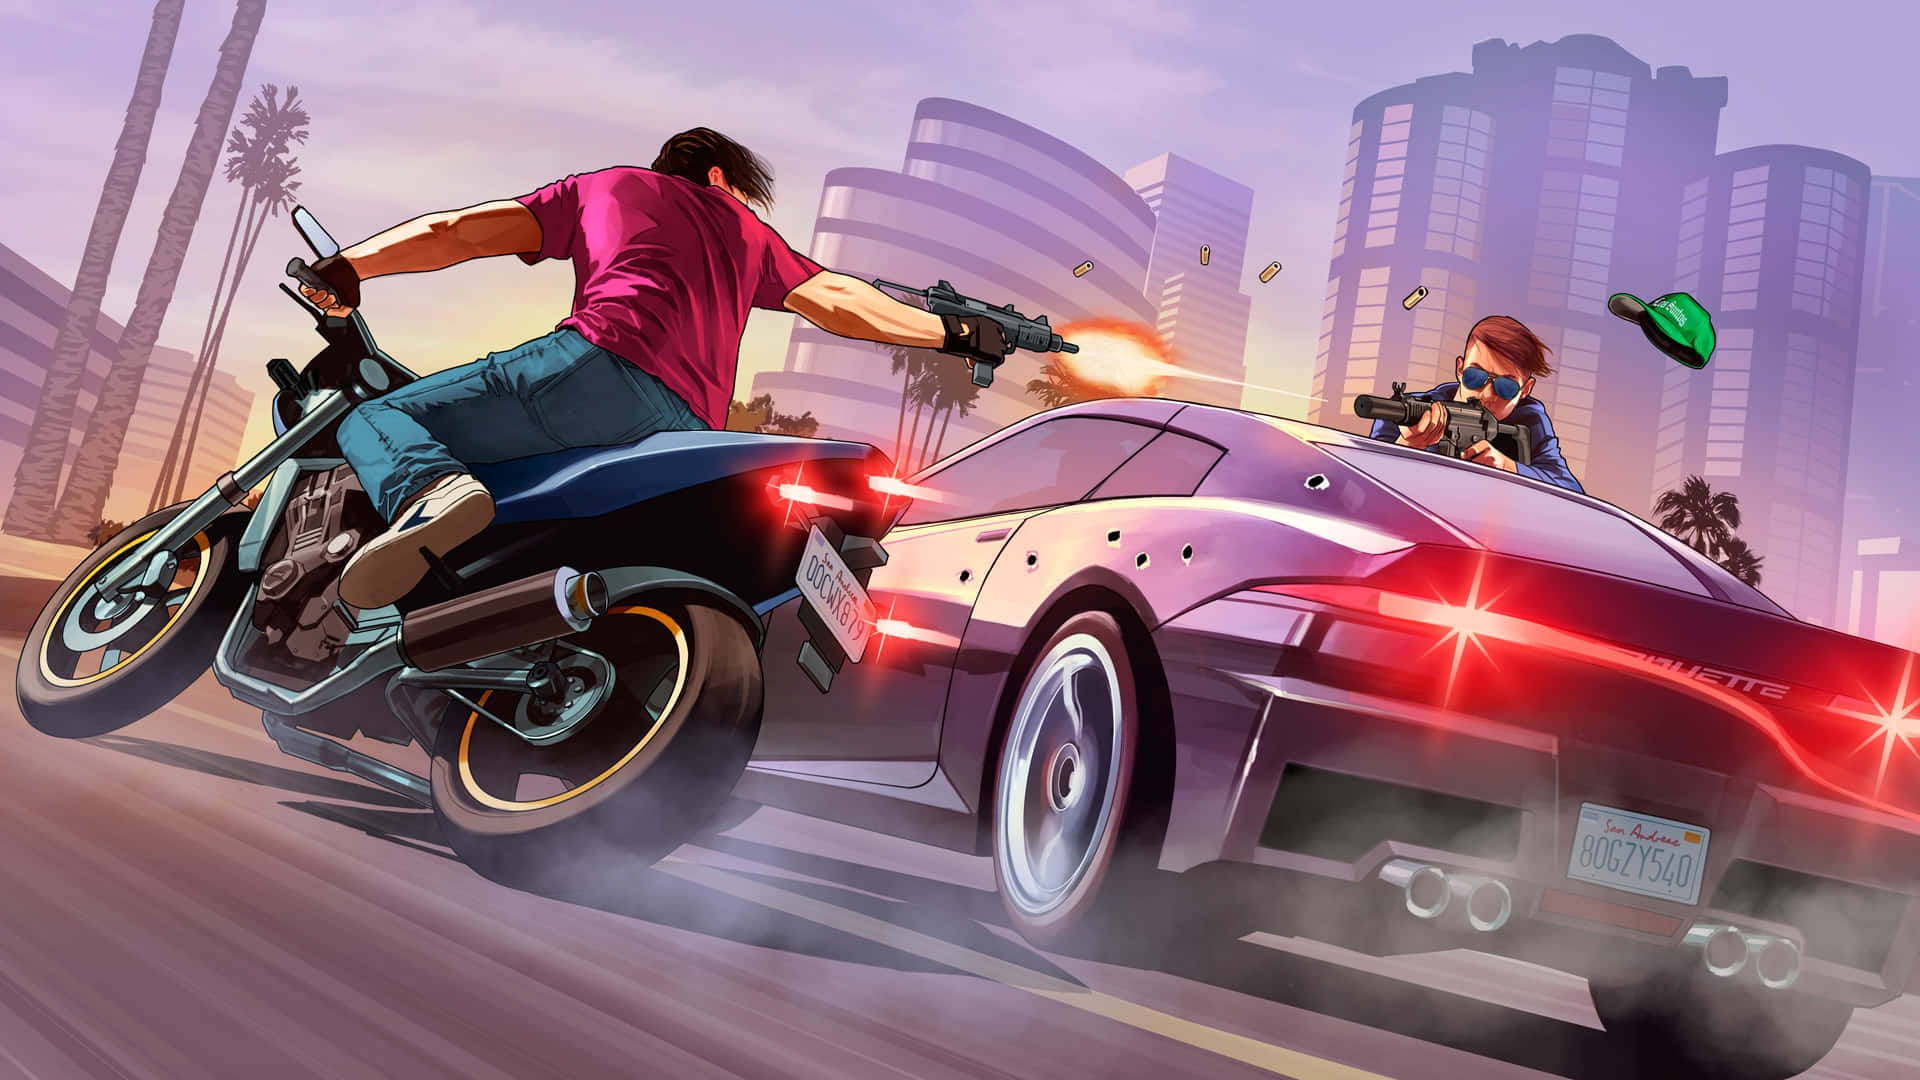 Gta Background Fanart Drawing Motorcycle Versus Car Shoot Out Background